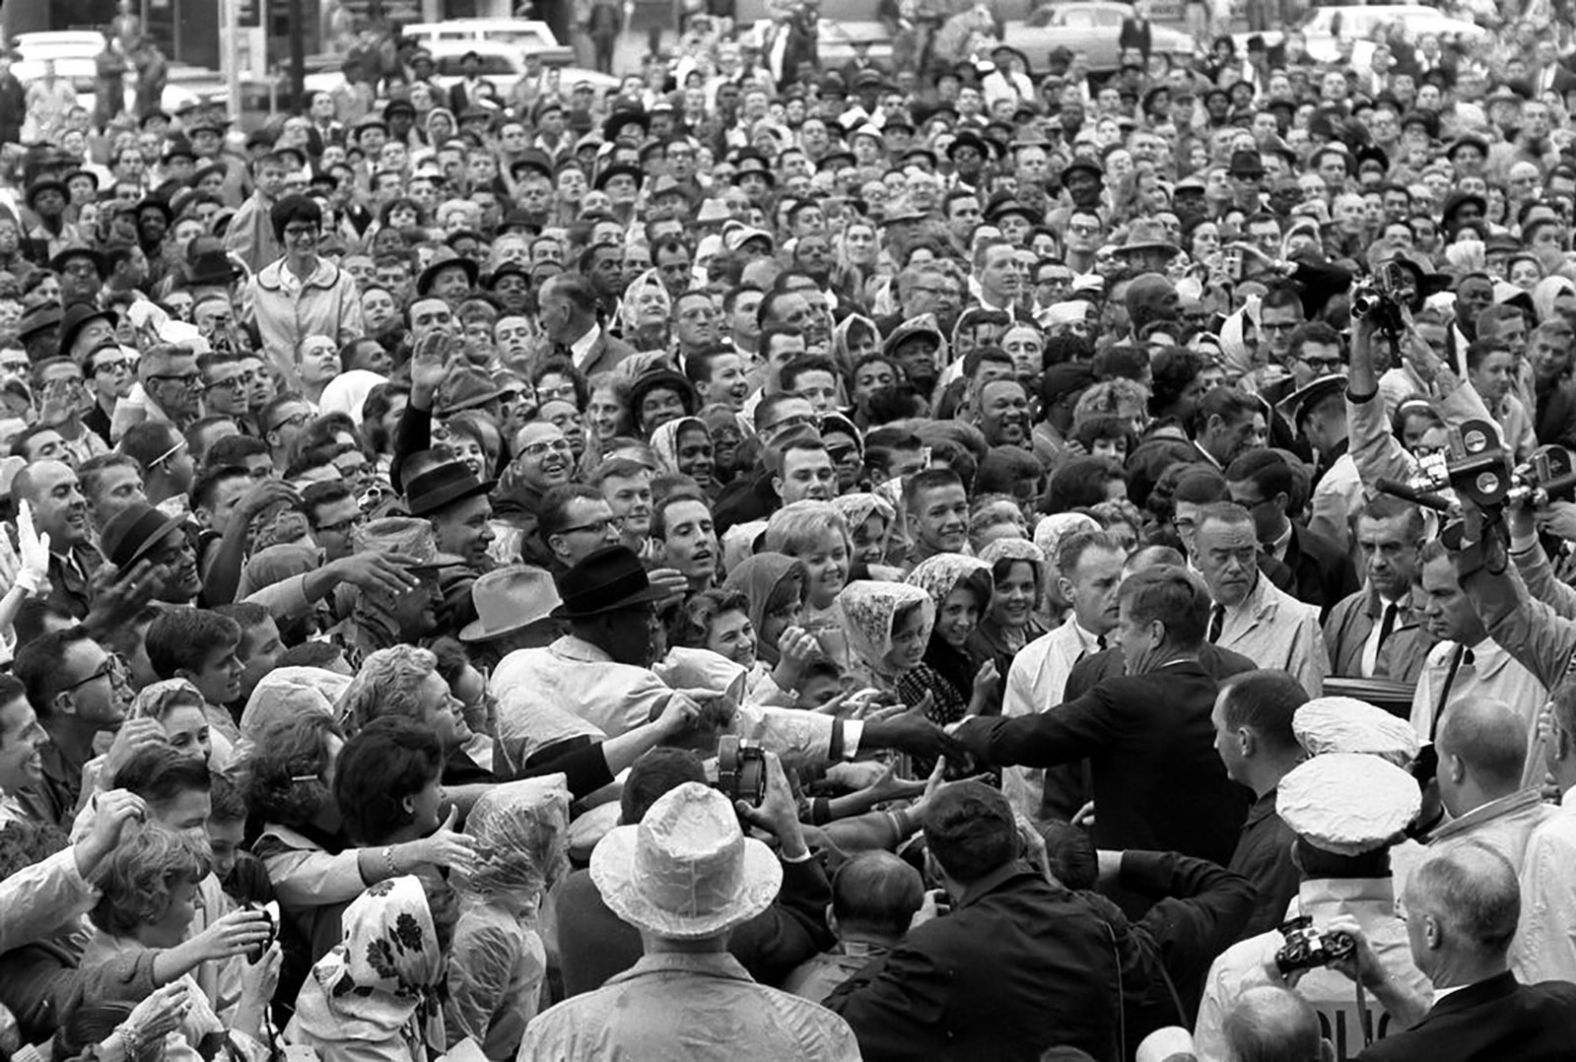 After the breakfast, Kennedy spoke to a crowd outside the Hotel Texas in Fort Worth. He then headed to Dallas aboard Air Force One.